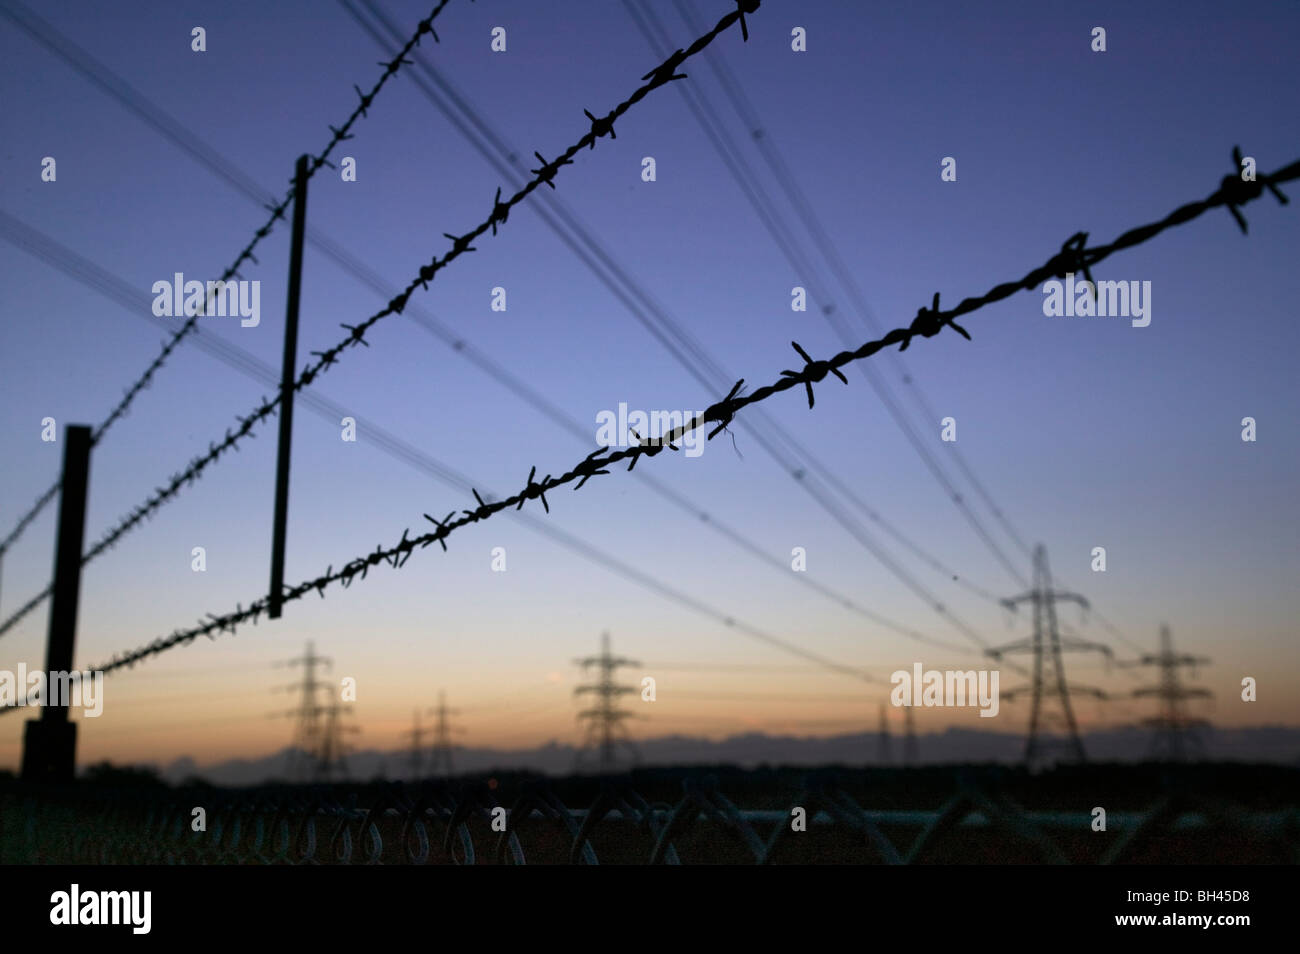 Graphic of barbed wire and pylons at dawn. Stock Photo